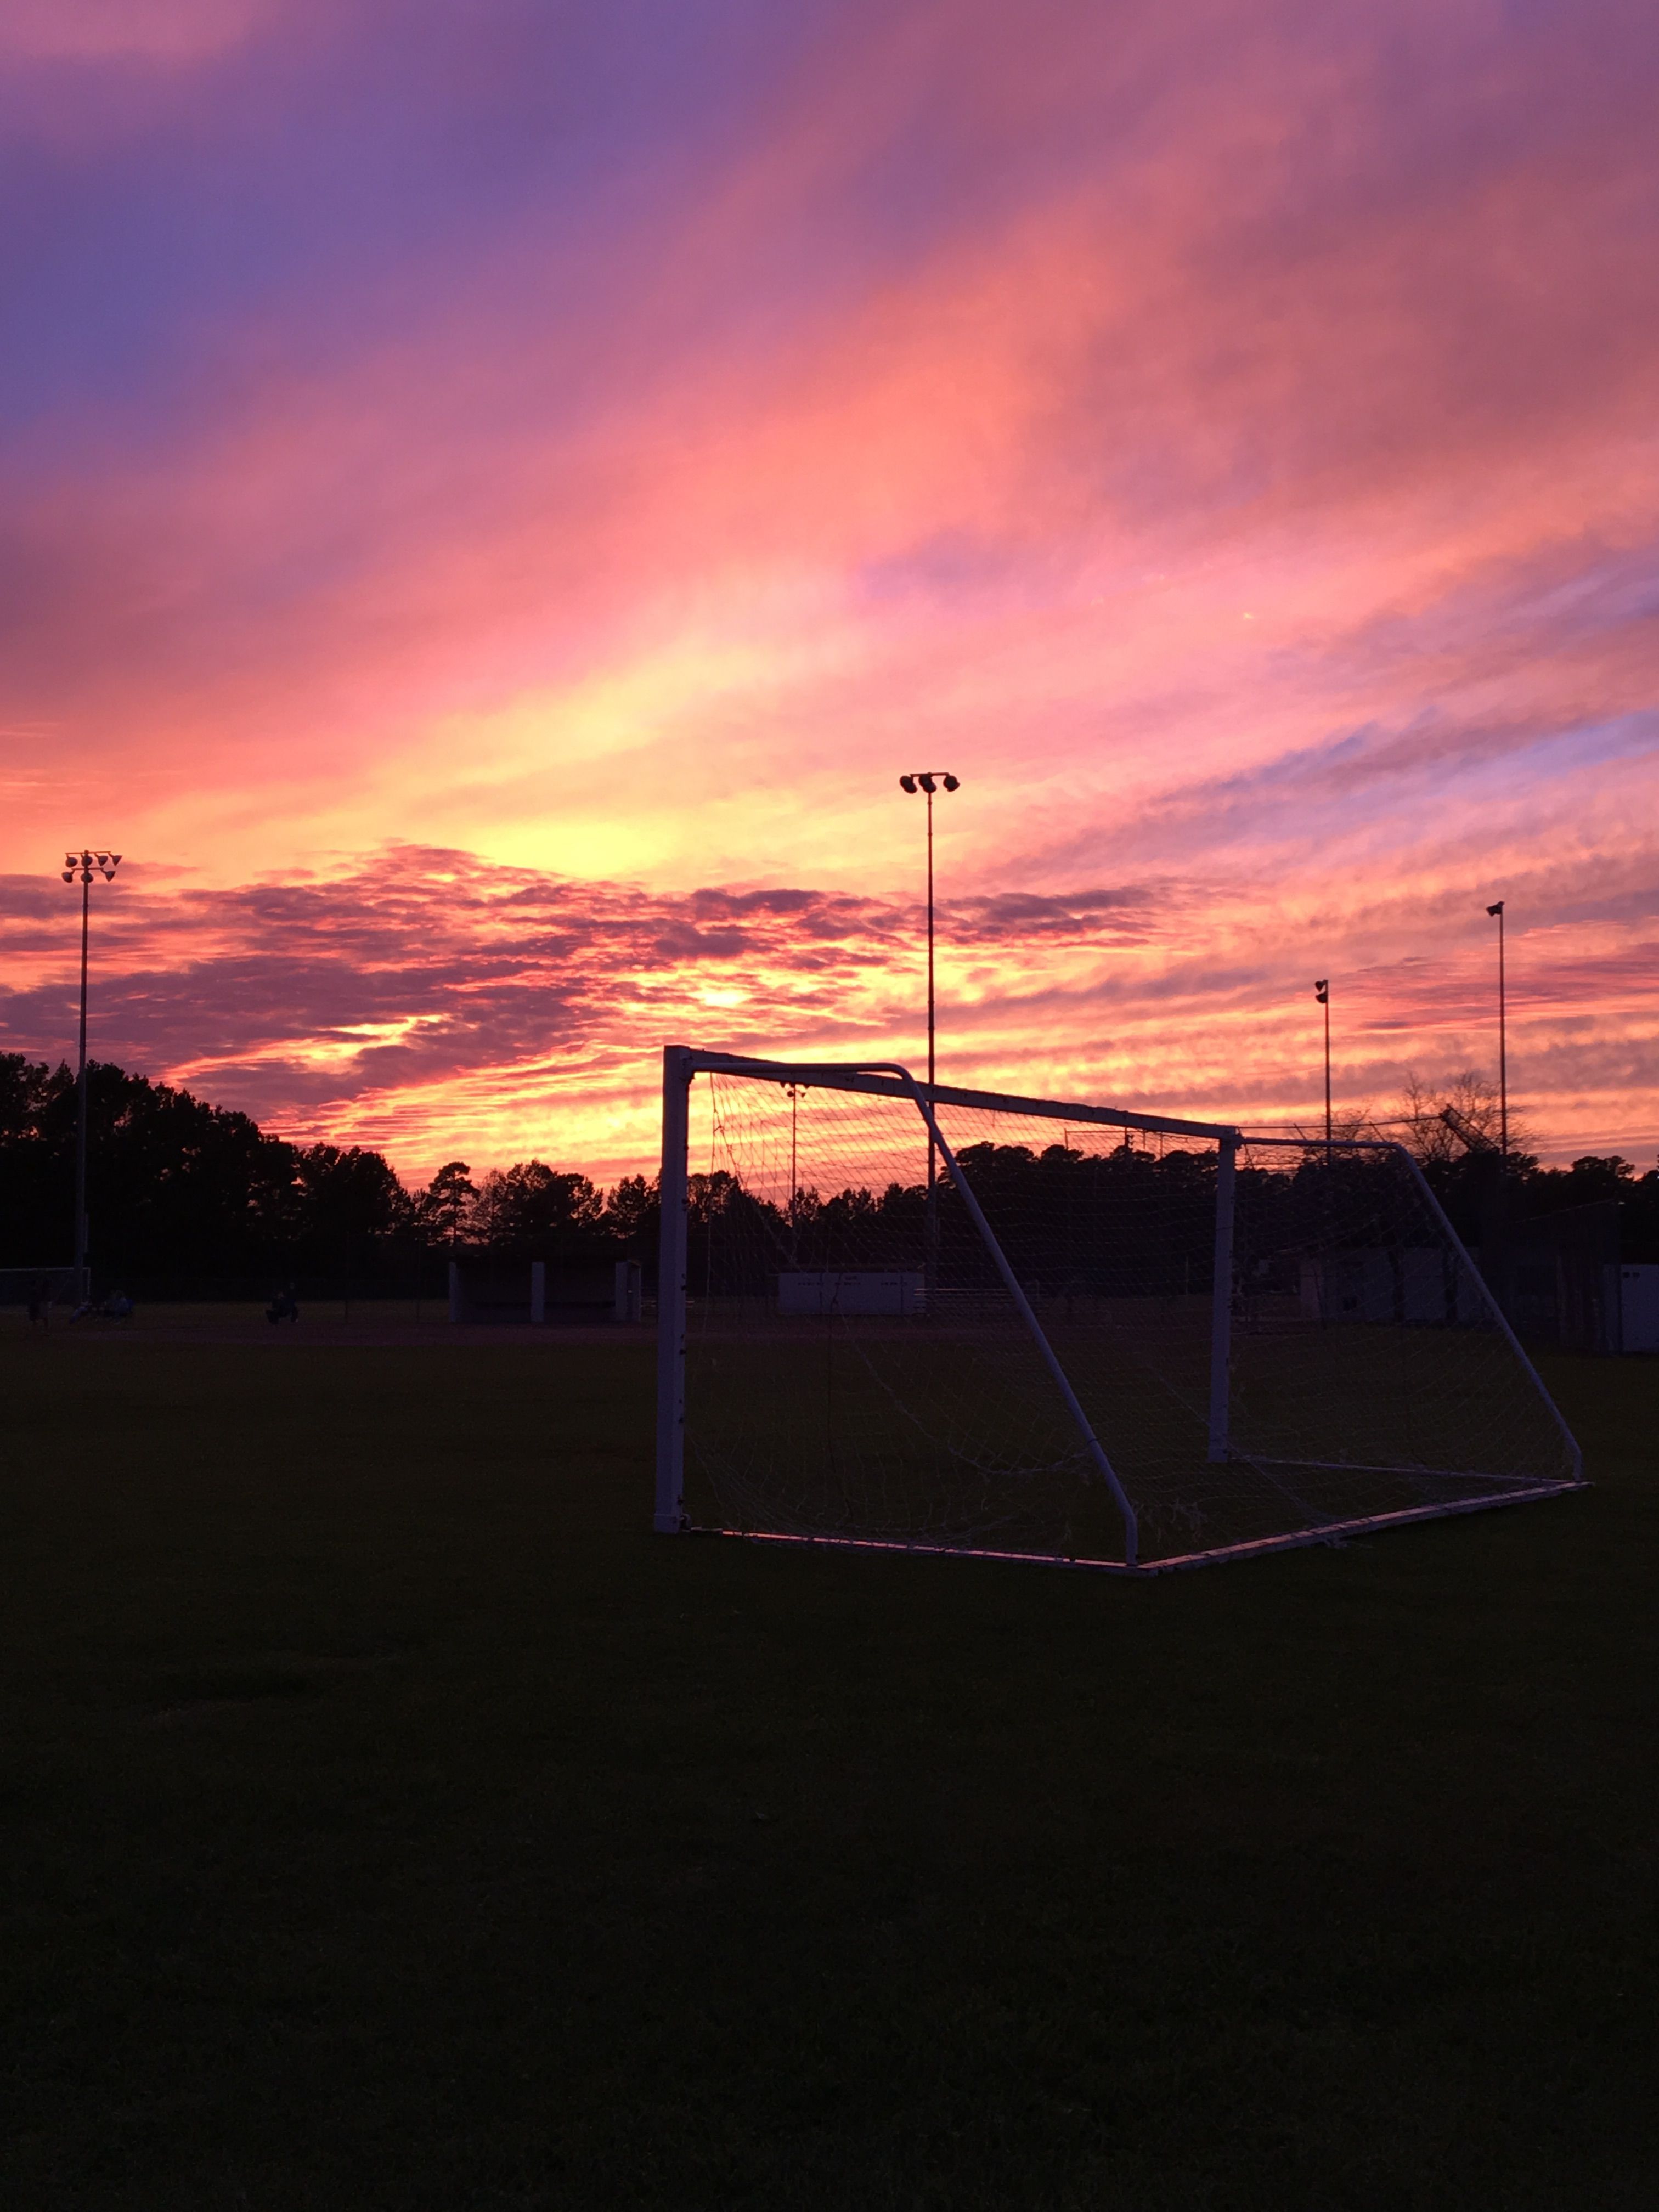 Sunset over the soccer field. Soccer picture, Soccer background, Soccer photography